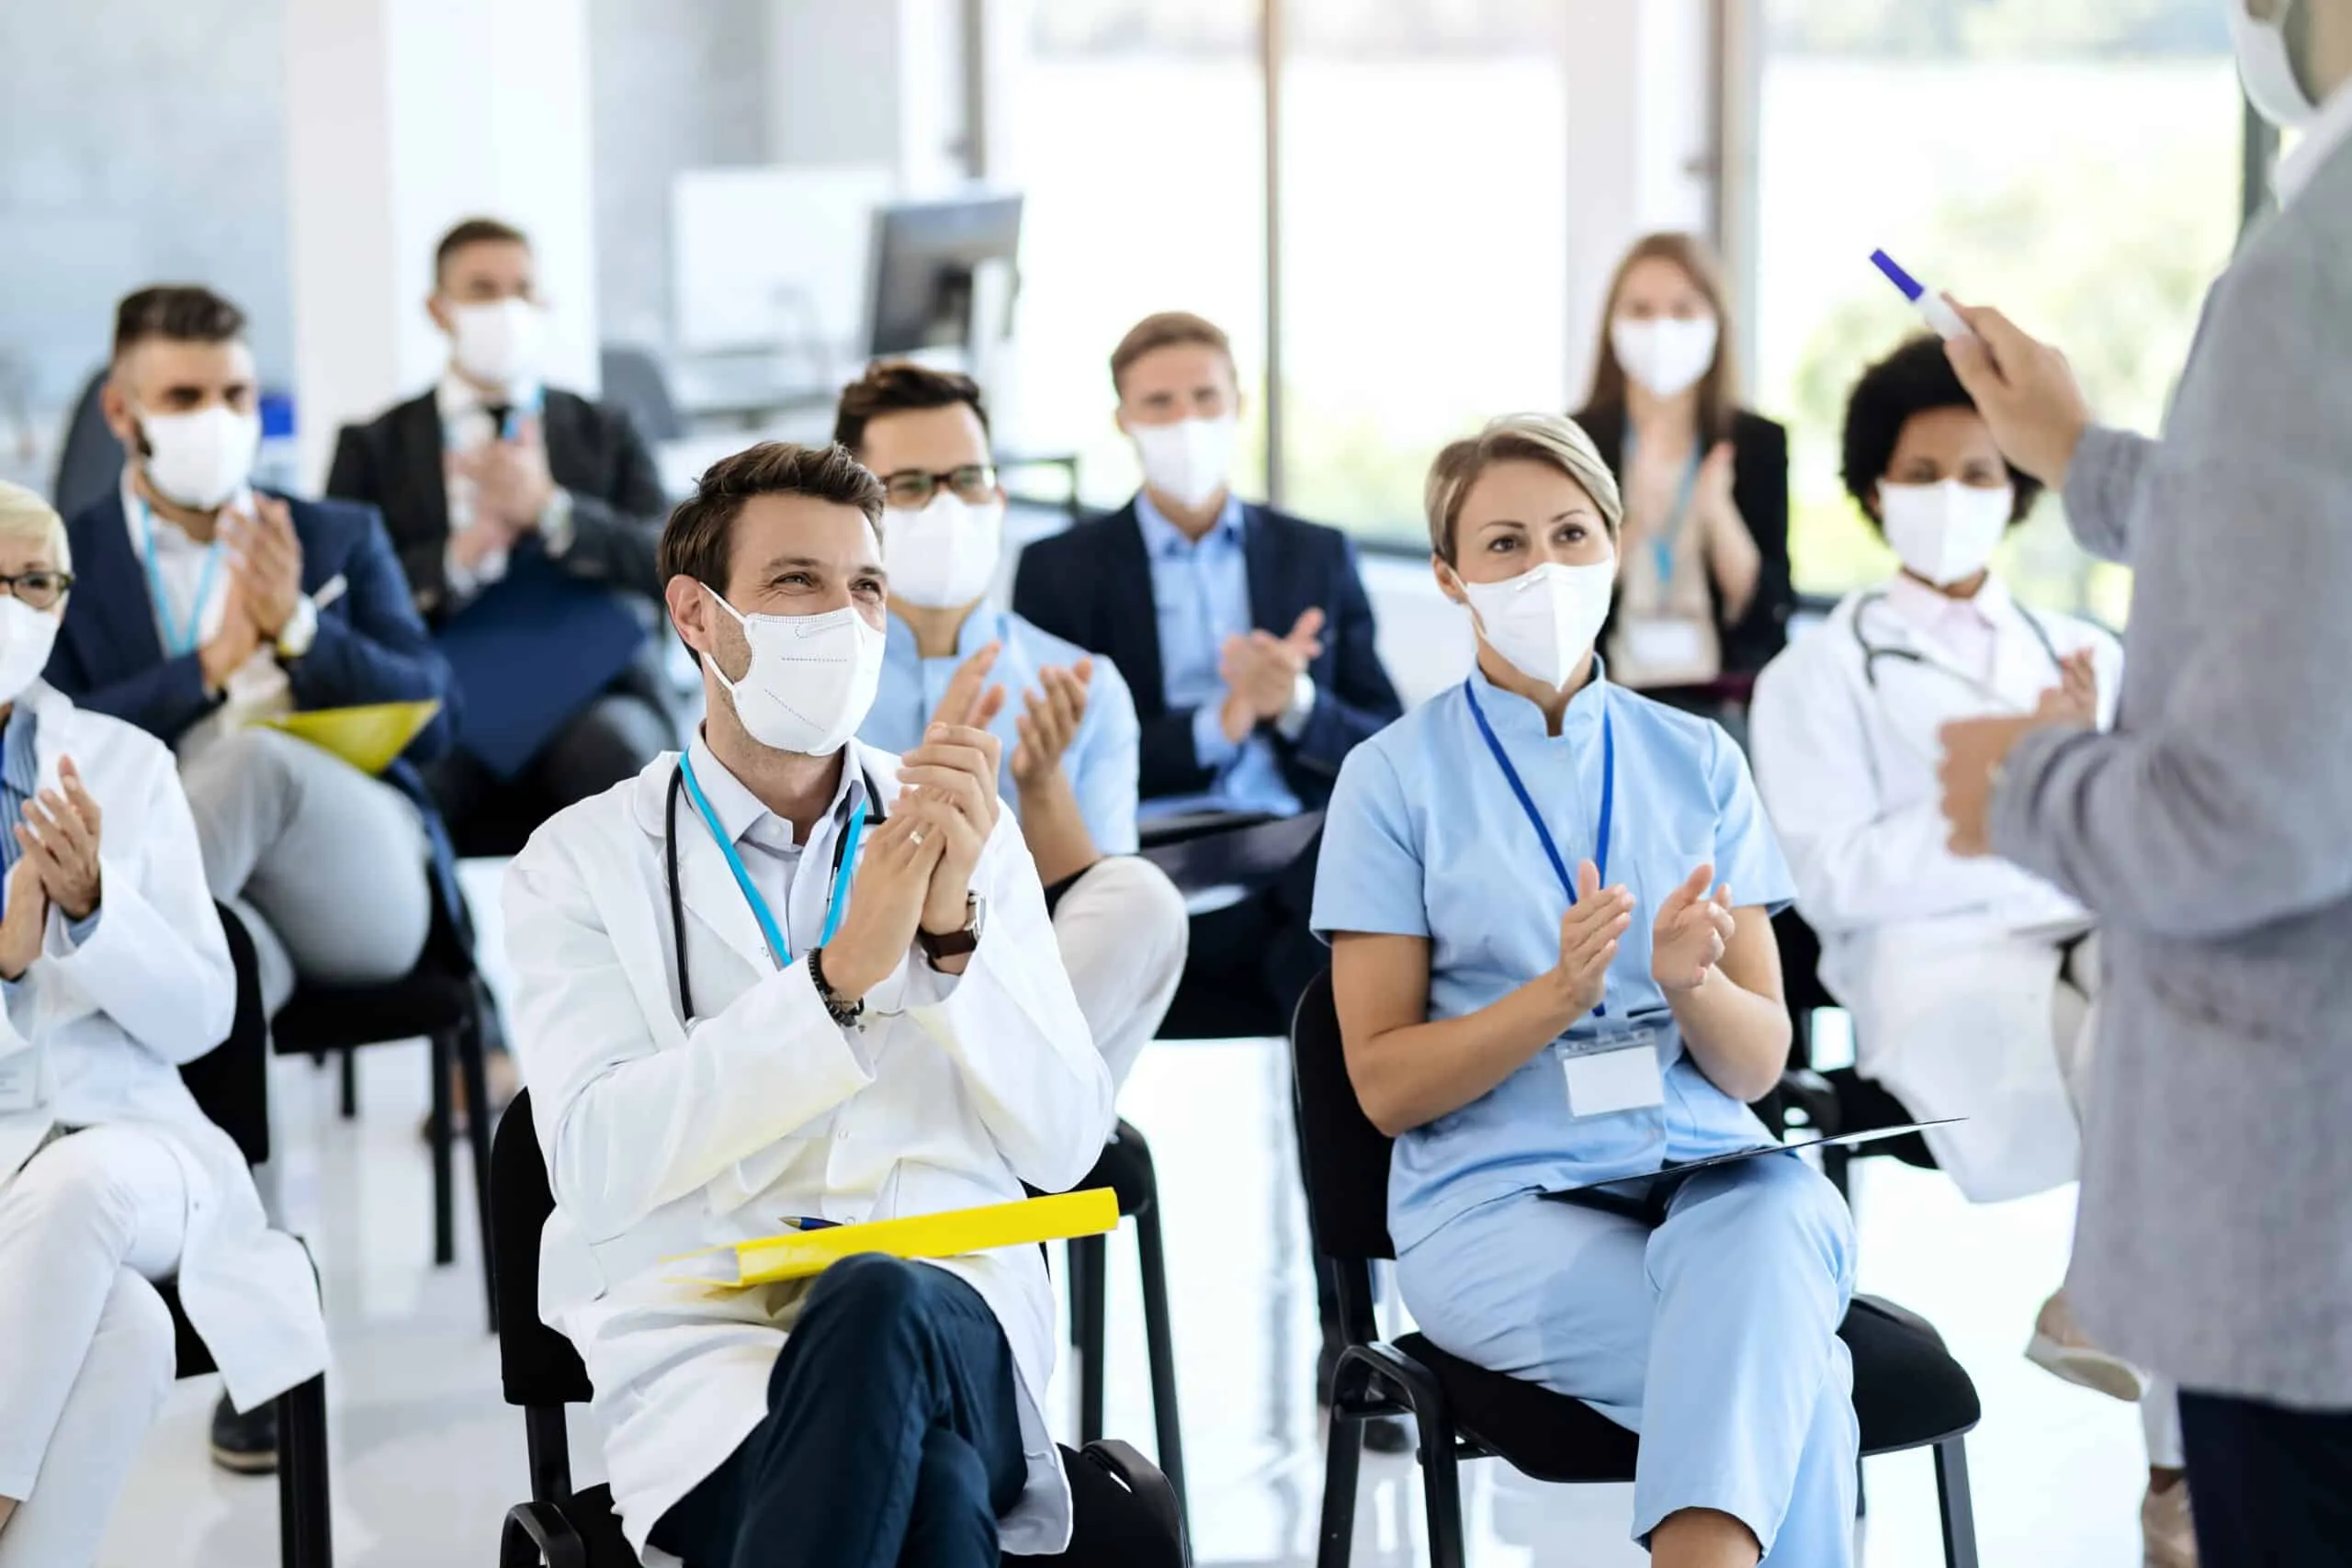 healthcare workers business people wearing face masks applauding seminar scaled 1